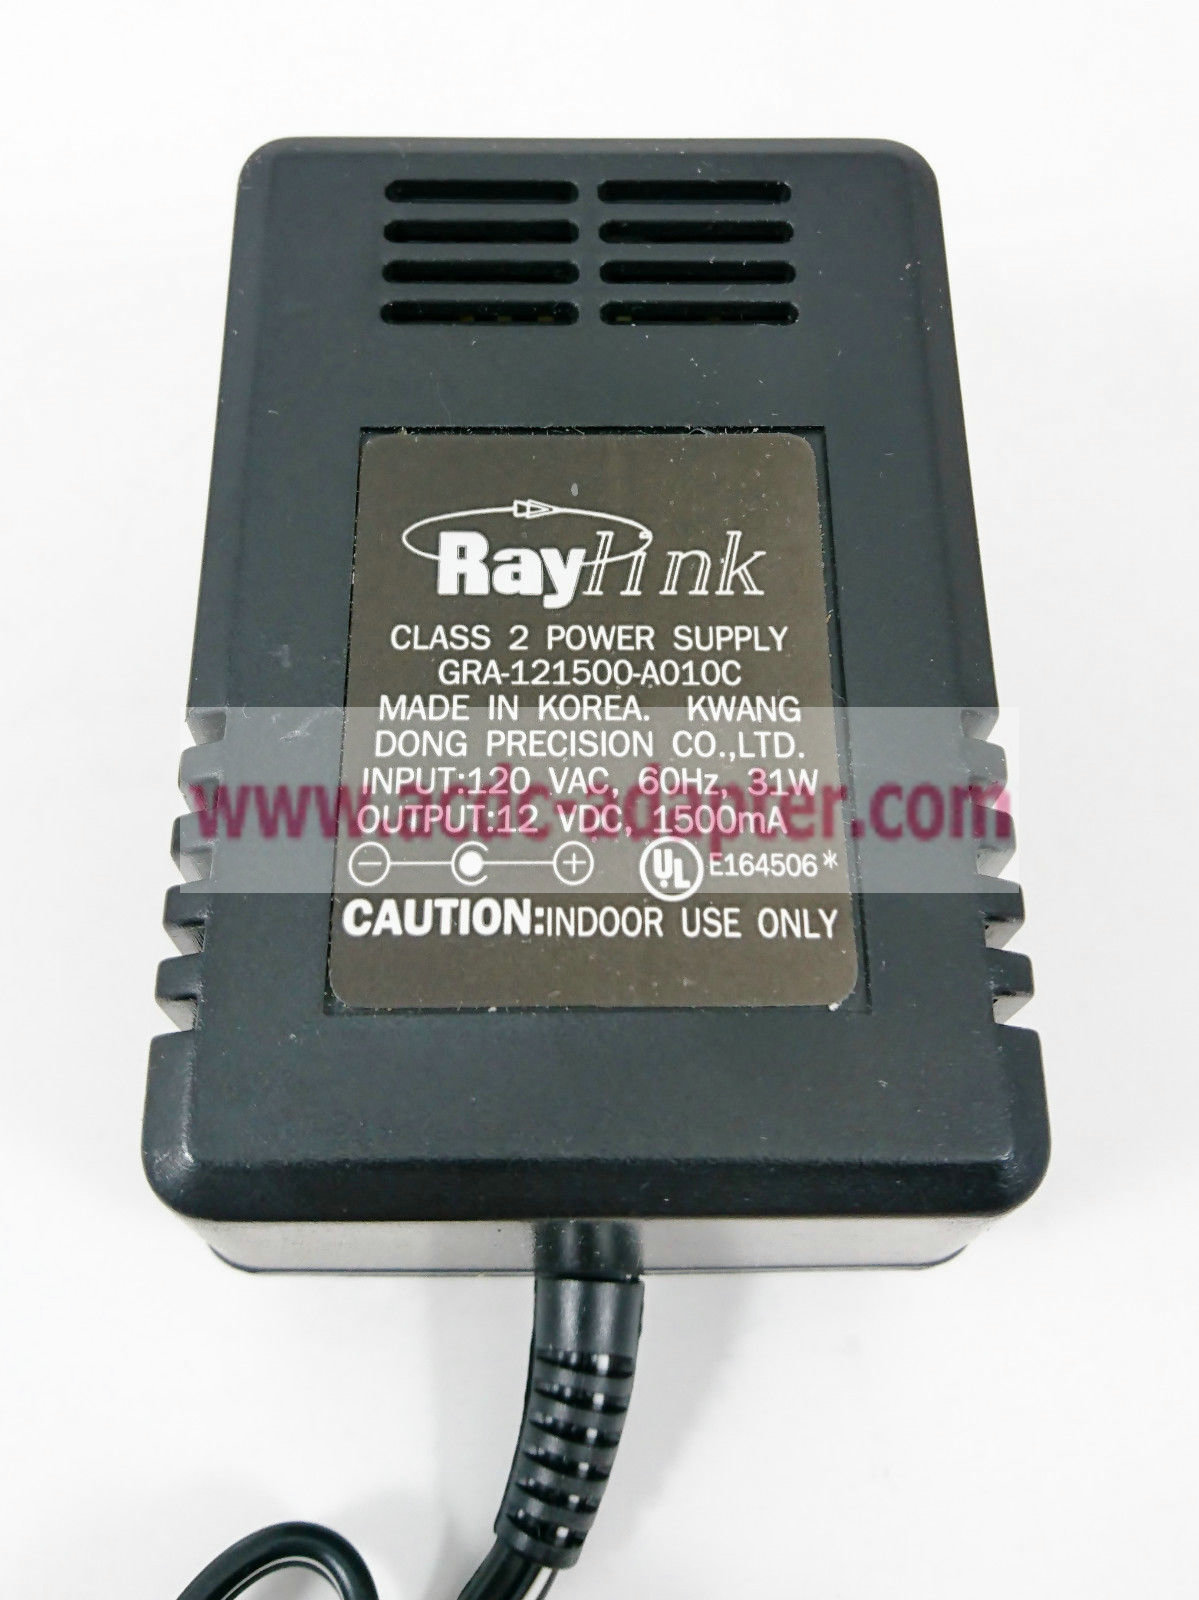 Brand new 12V 1500mA (1.5 Amp) Raylink GRA-121500-A010C 31W Class 2 Power Supply - Click Image to Close